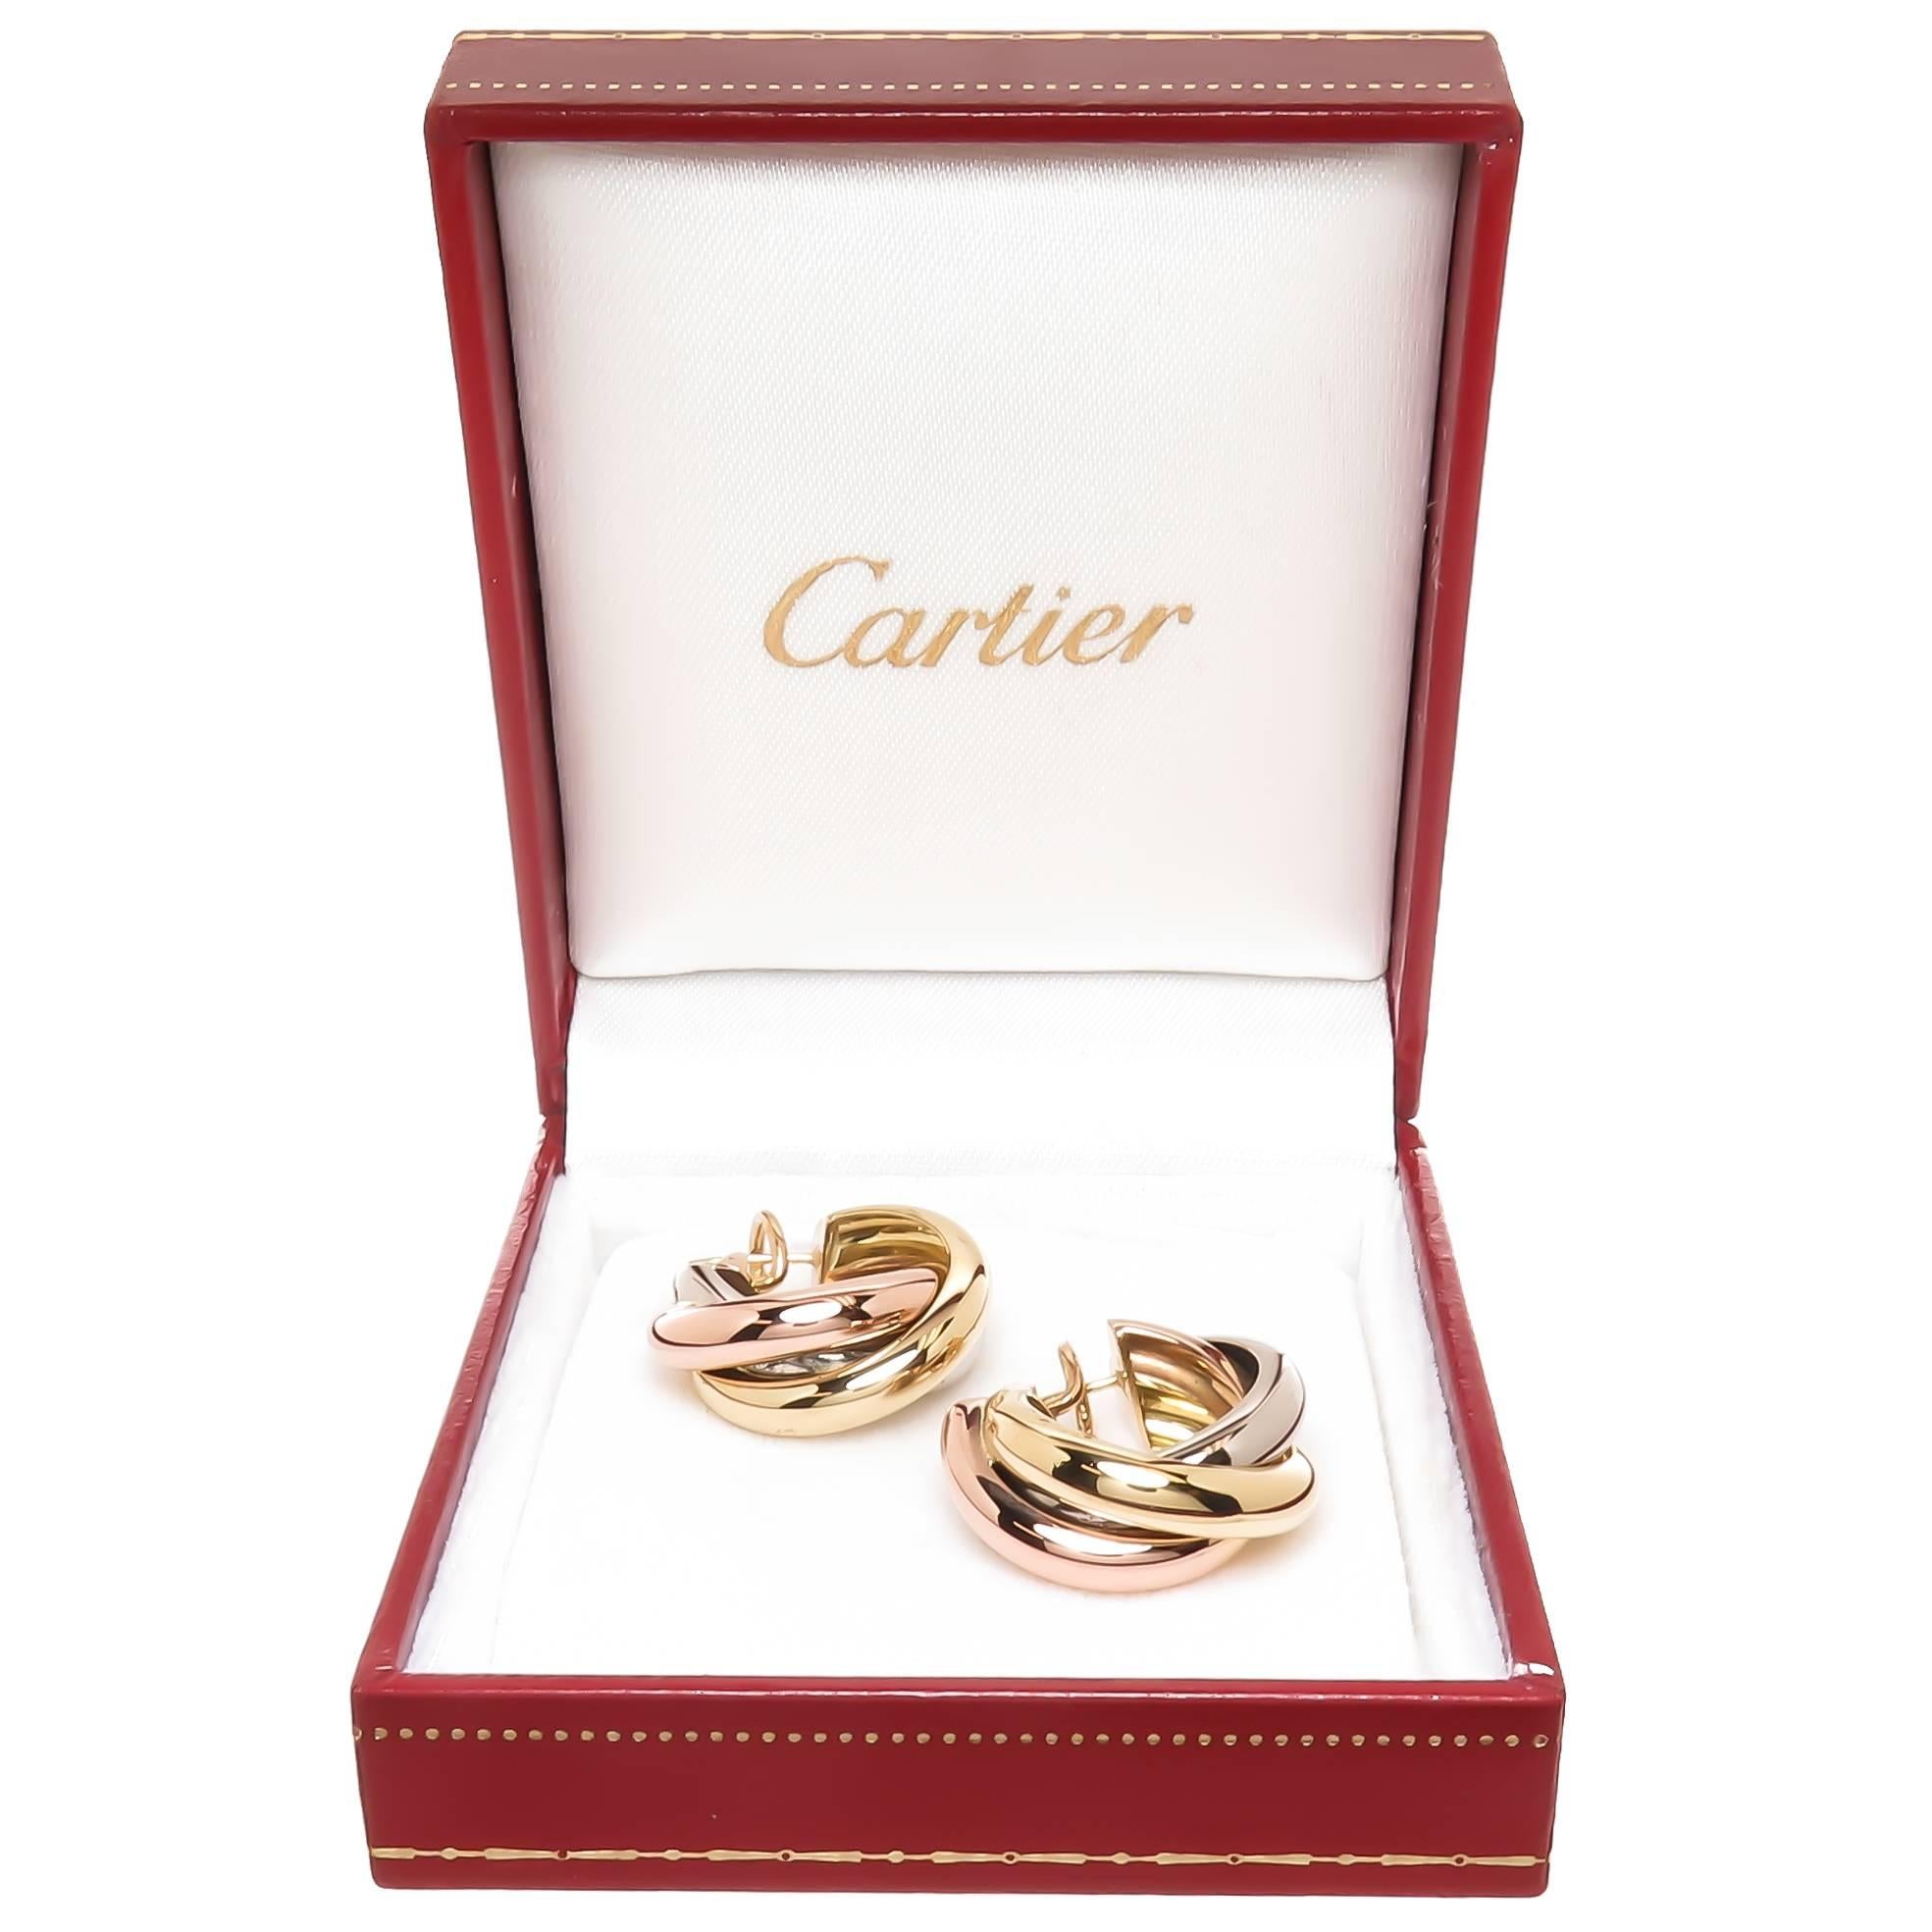 Circa 2005 Cartier Trinity 18K yellow, Pink and White Gold Tri color Earrings, measuring 1 inch in diameter and 3/8 inch wide. Having Omega Clip backs with a post. Come in a Cartier Gift Box. 